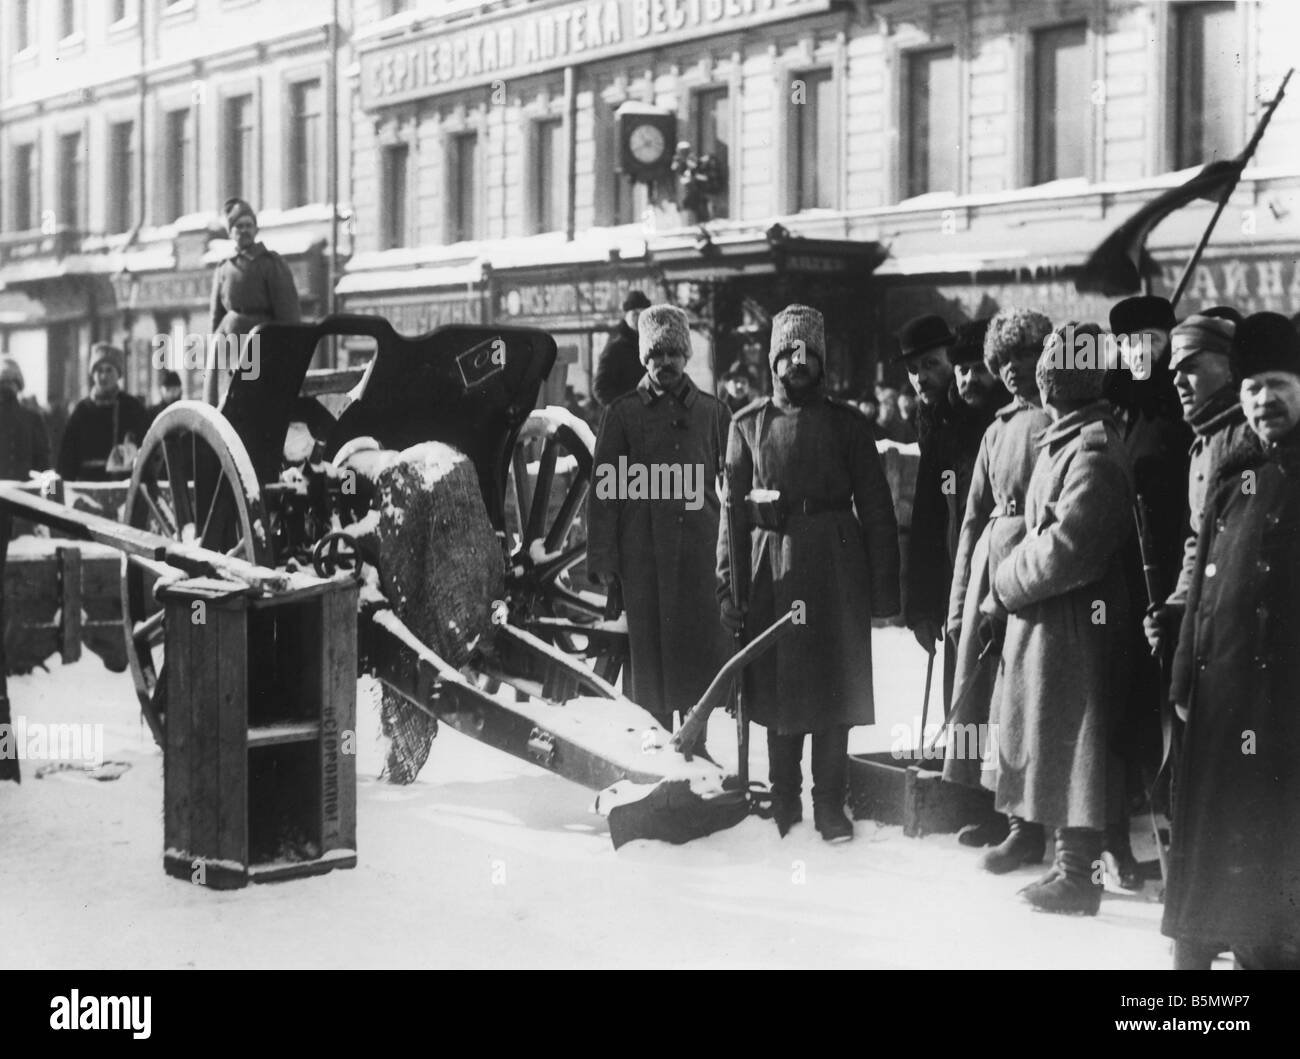 9RD 1917 3 12 A1 5 February Revolution Soldiors on barricad February Revolution 12 March 1917 27 Feb old style The Petrogradian Stock Photo